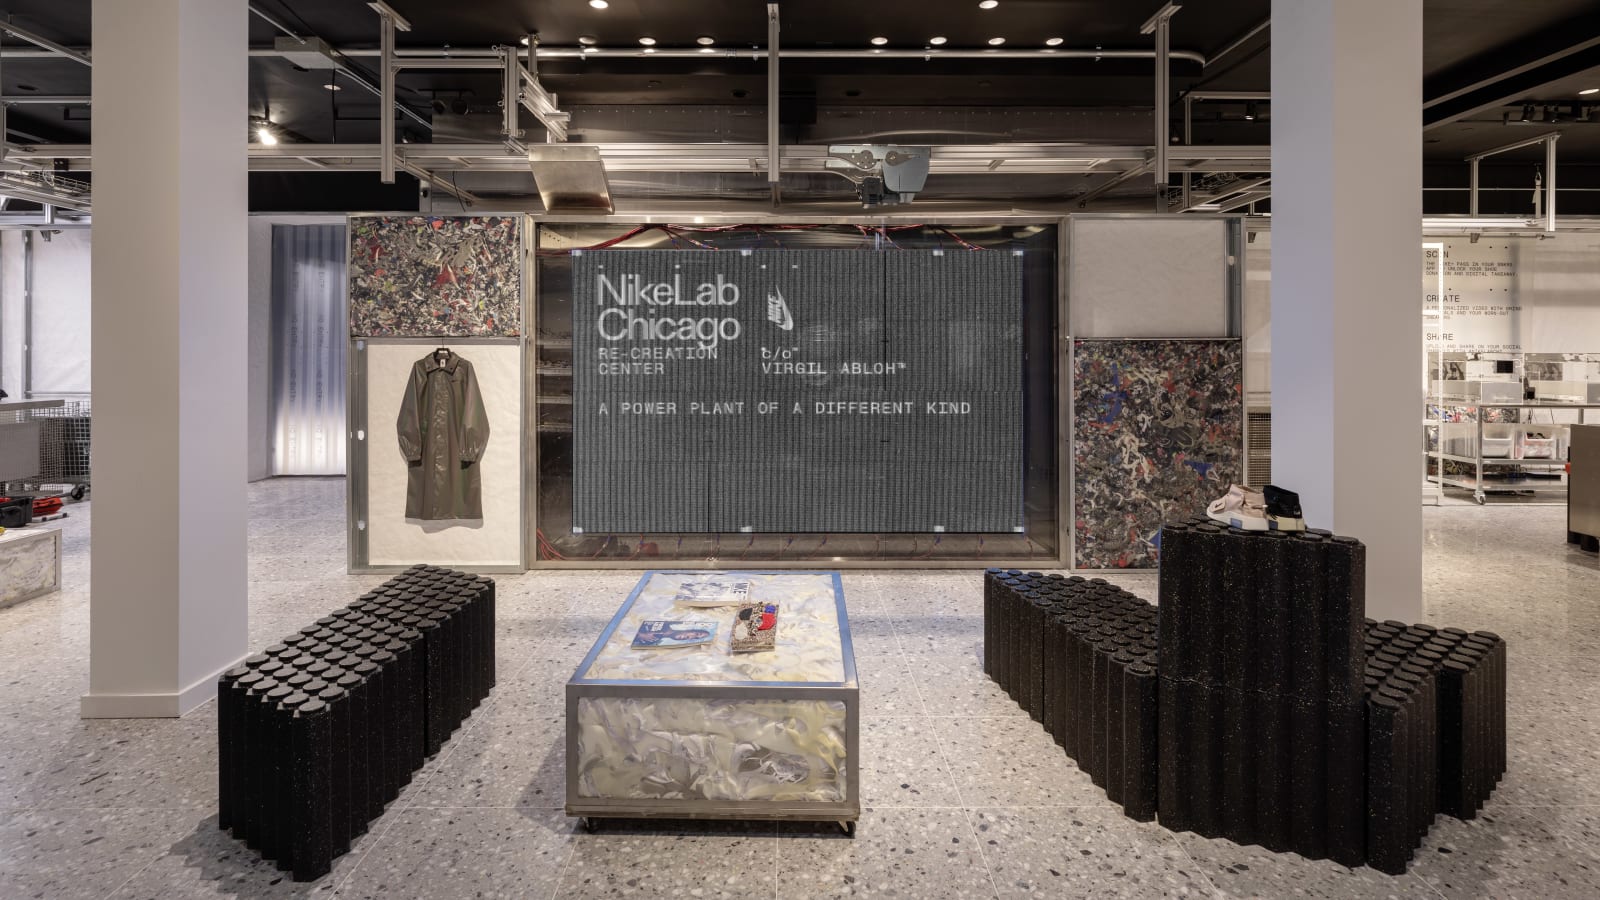 Virgil Abloh's NikeLab Chicago Project Will Be A Space For Creatives